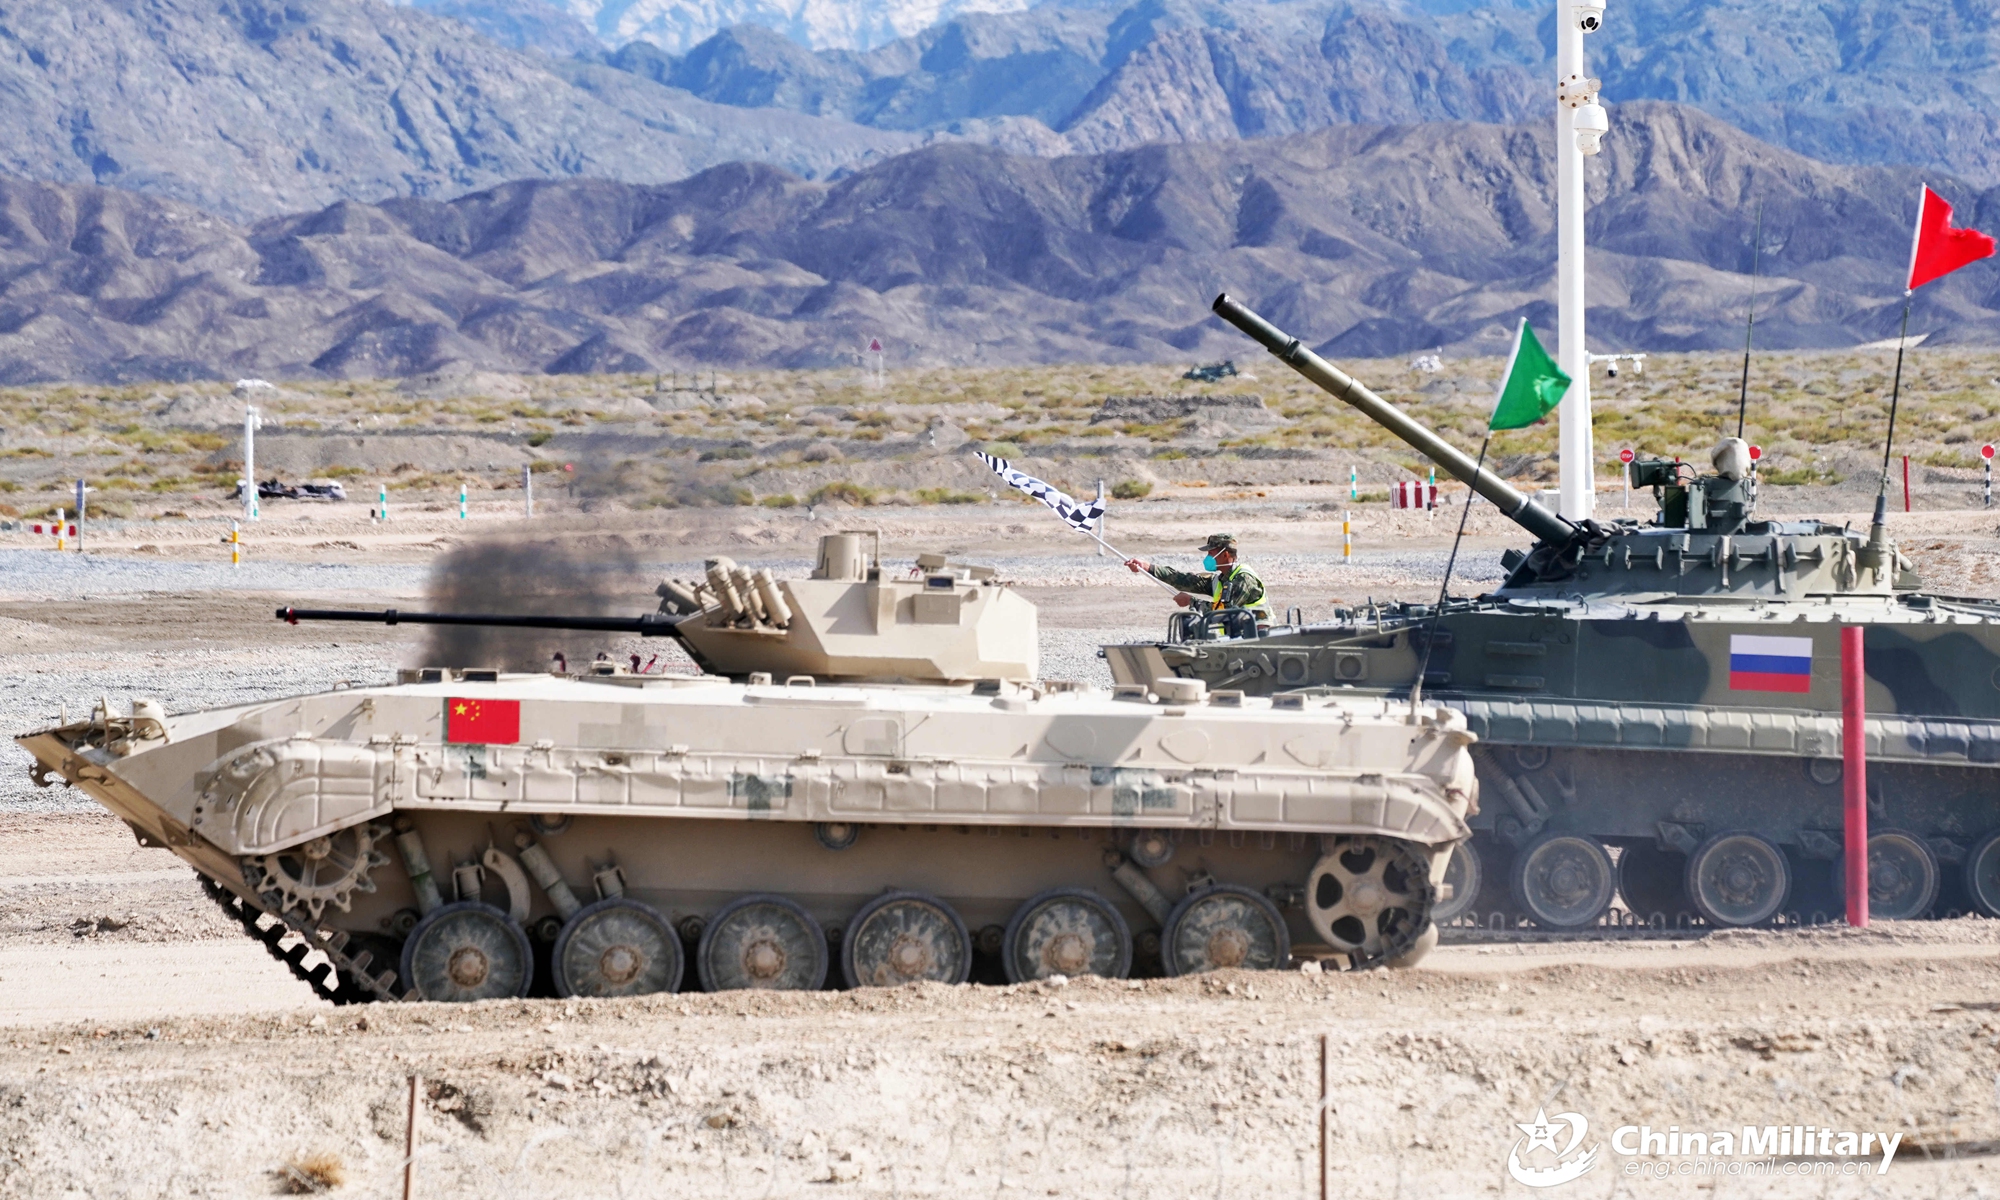 Infantry fighting vehicles of the Chinese team and the Russian team pull out into the track from the starting line in the relay race, the last stage of Suvorov Onslaught contest of the International Army Games 2022 (IAG 2022) in Korla, China's Xinjiang Uygur Autonomous Region, on August 21, 2022.Photo:eng.chinamil.com.cn